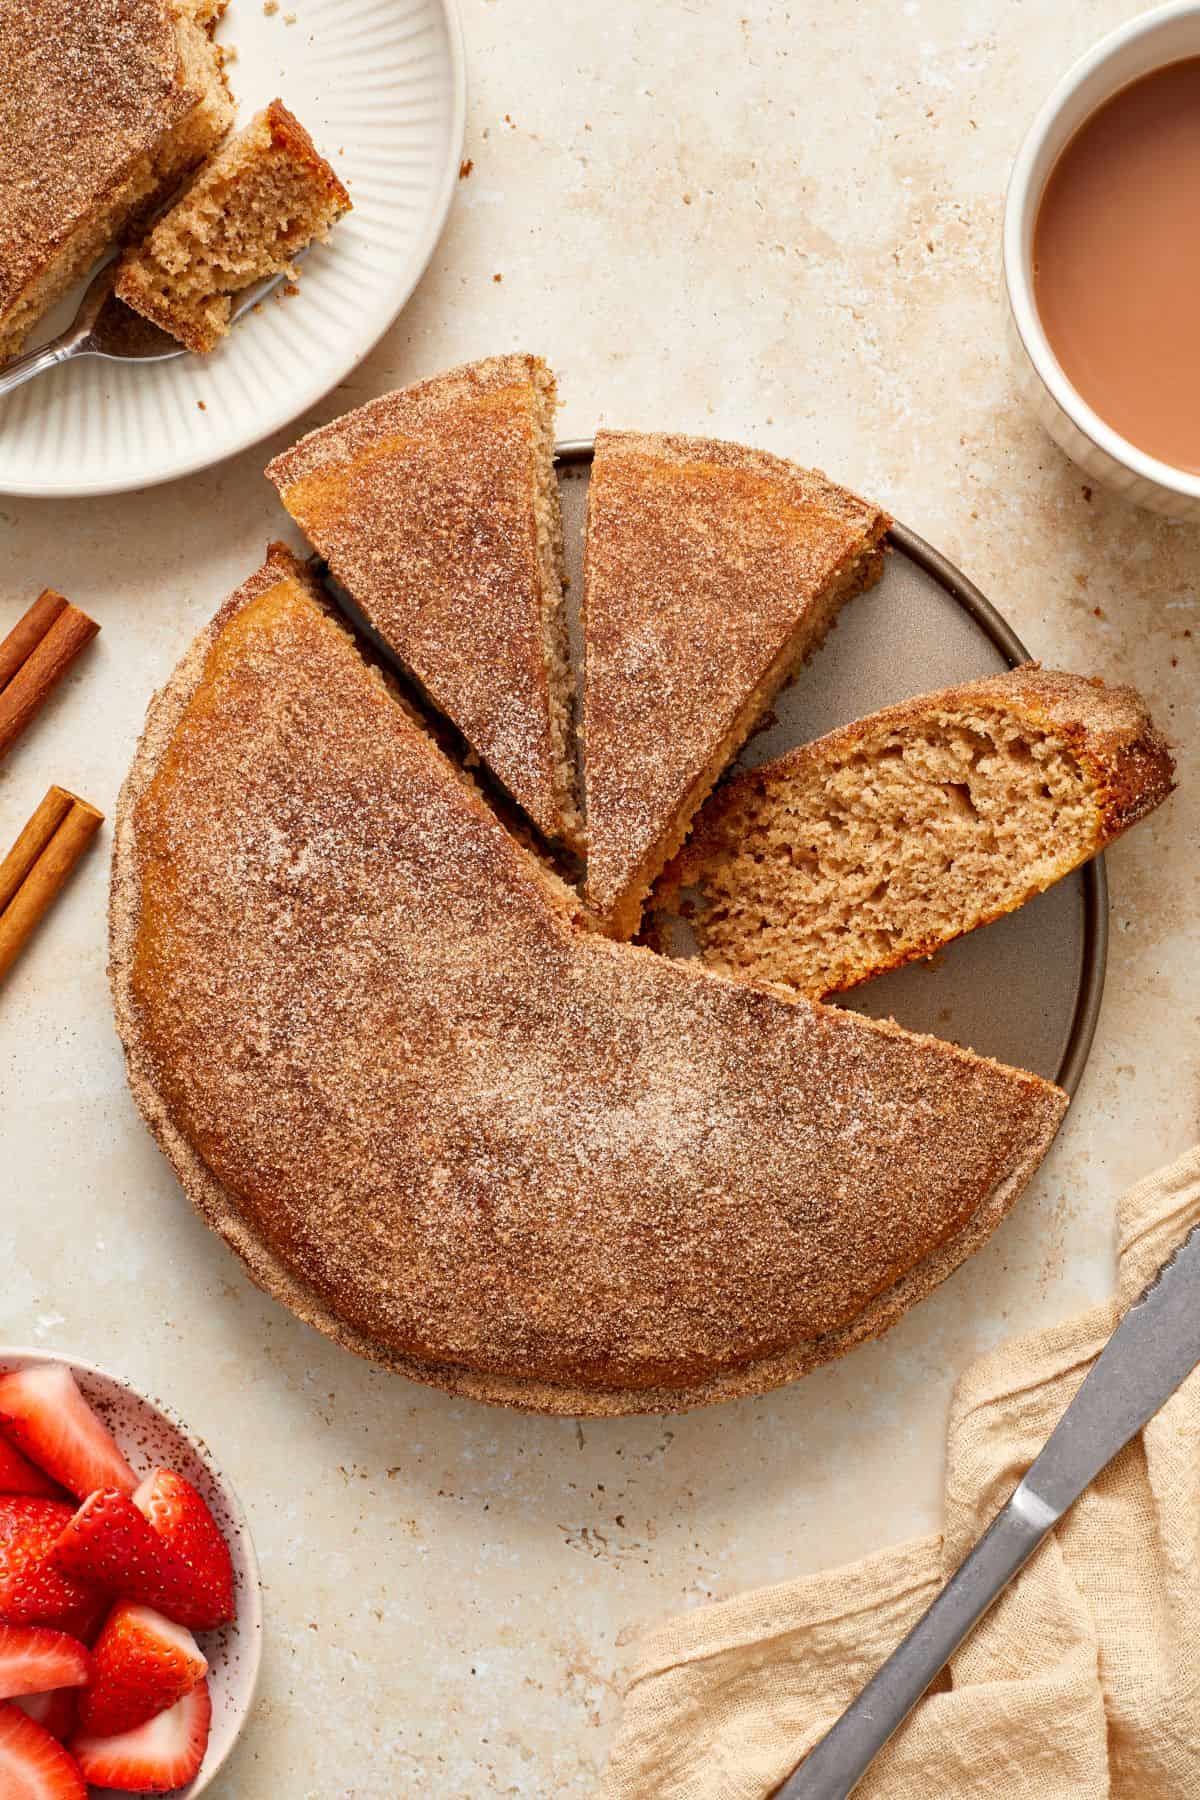 Cinnamon Tea Cake with three pieces cut, and one laying on the side showing the texture of the cake.